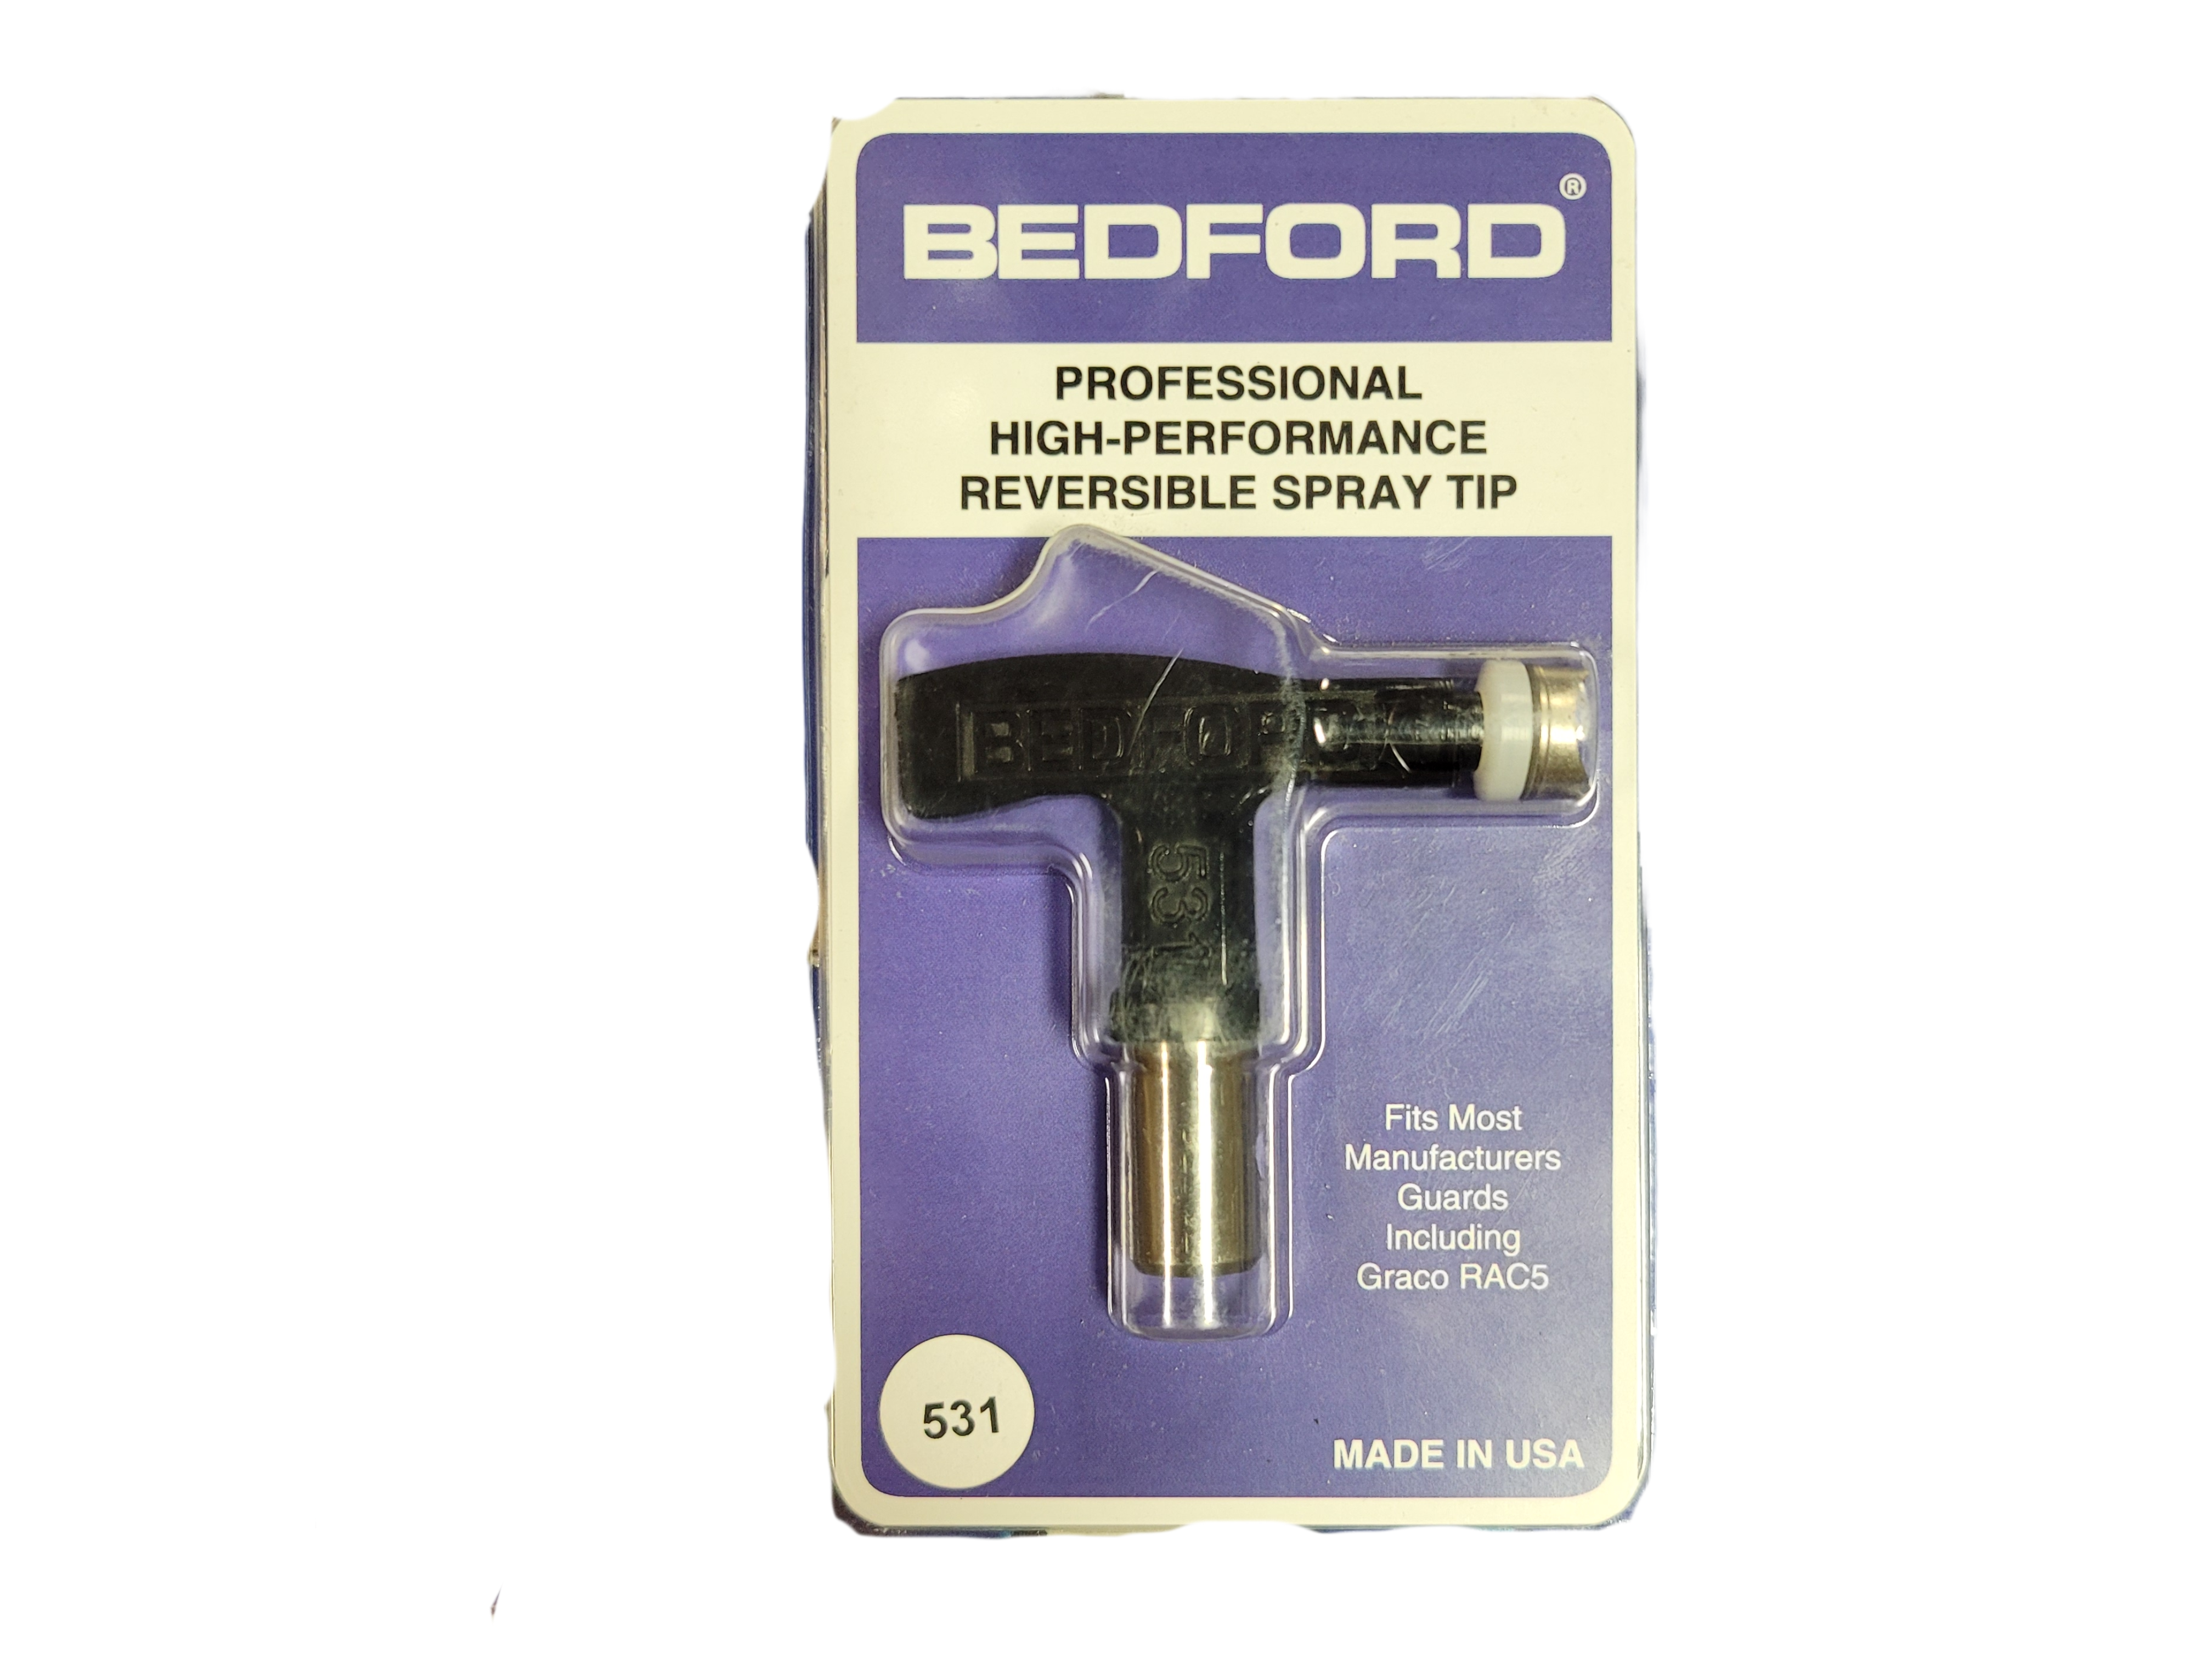 Bedford Precision 531 Professional High-Performance Reversable Spray Tip - Contractor's Maintenance Service